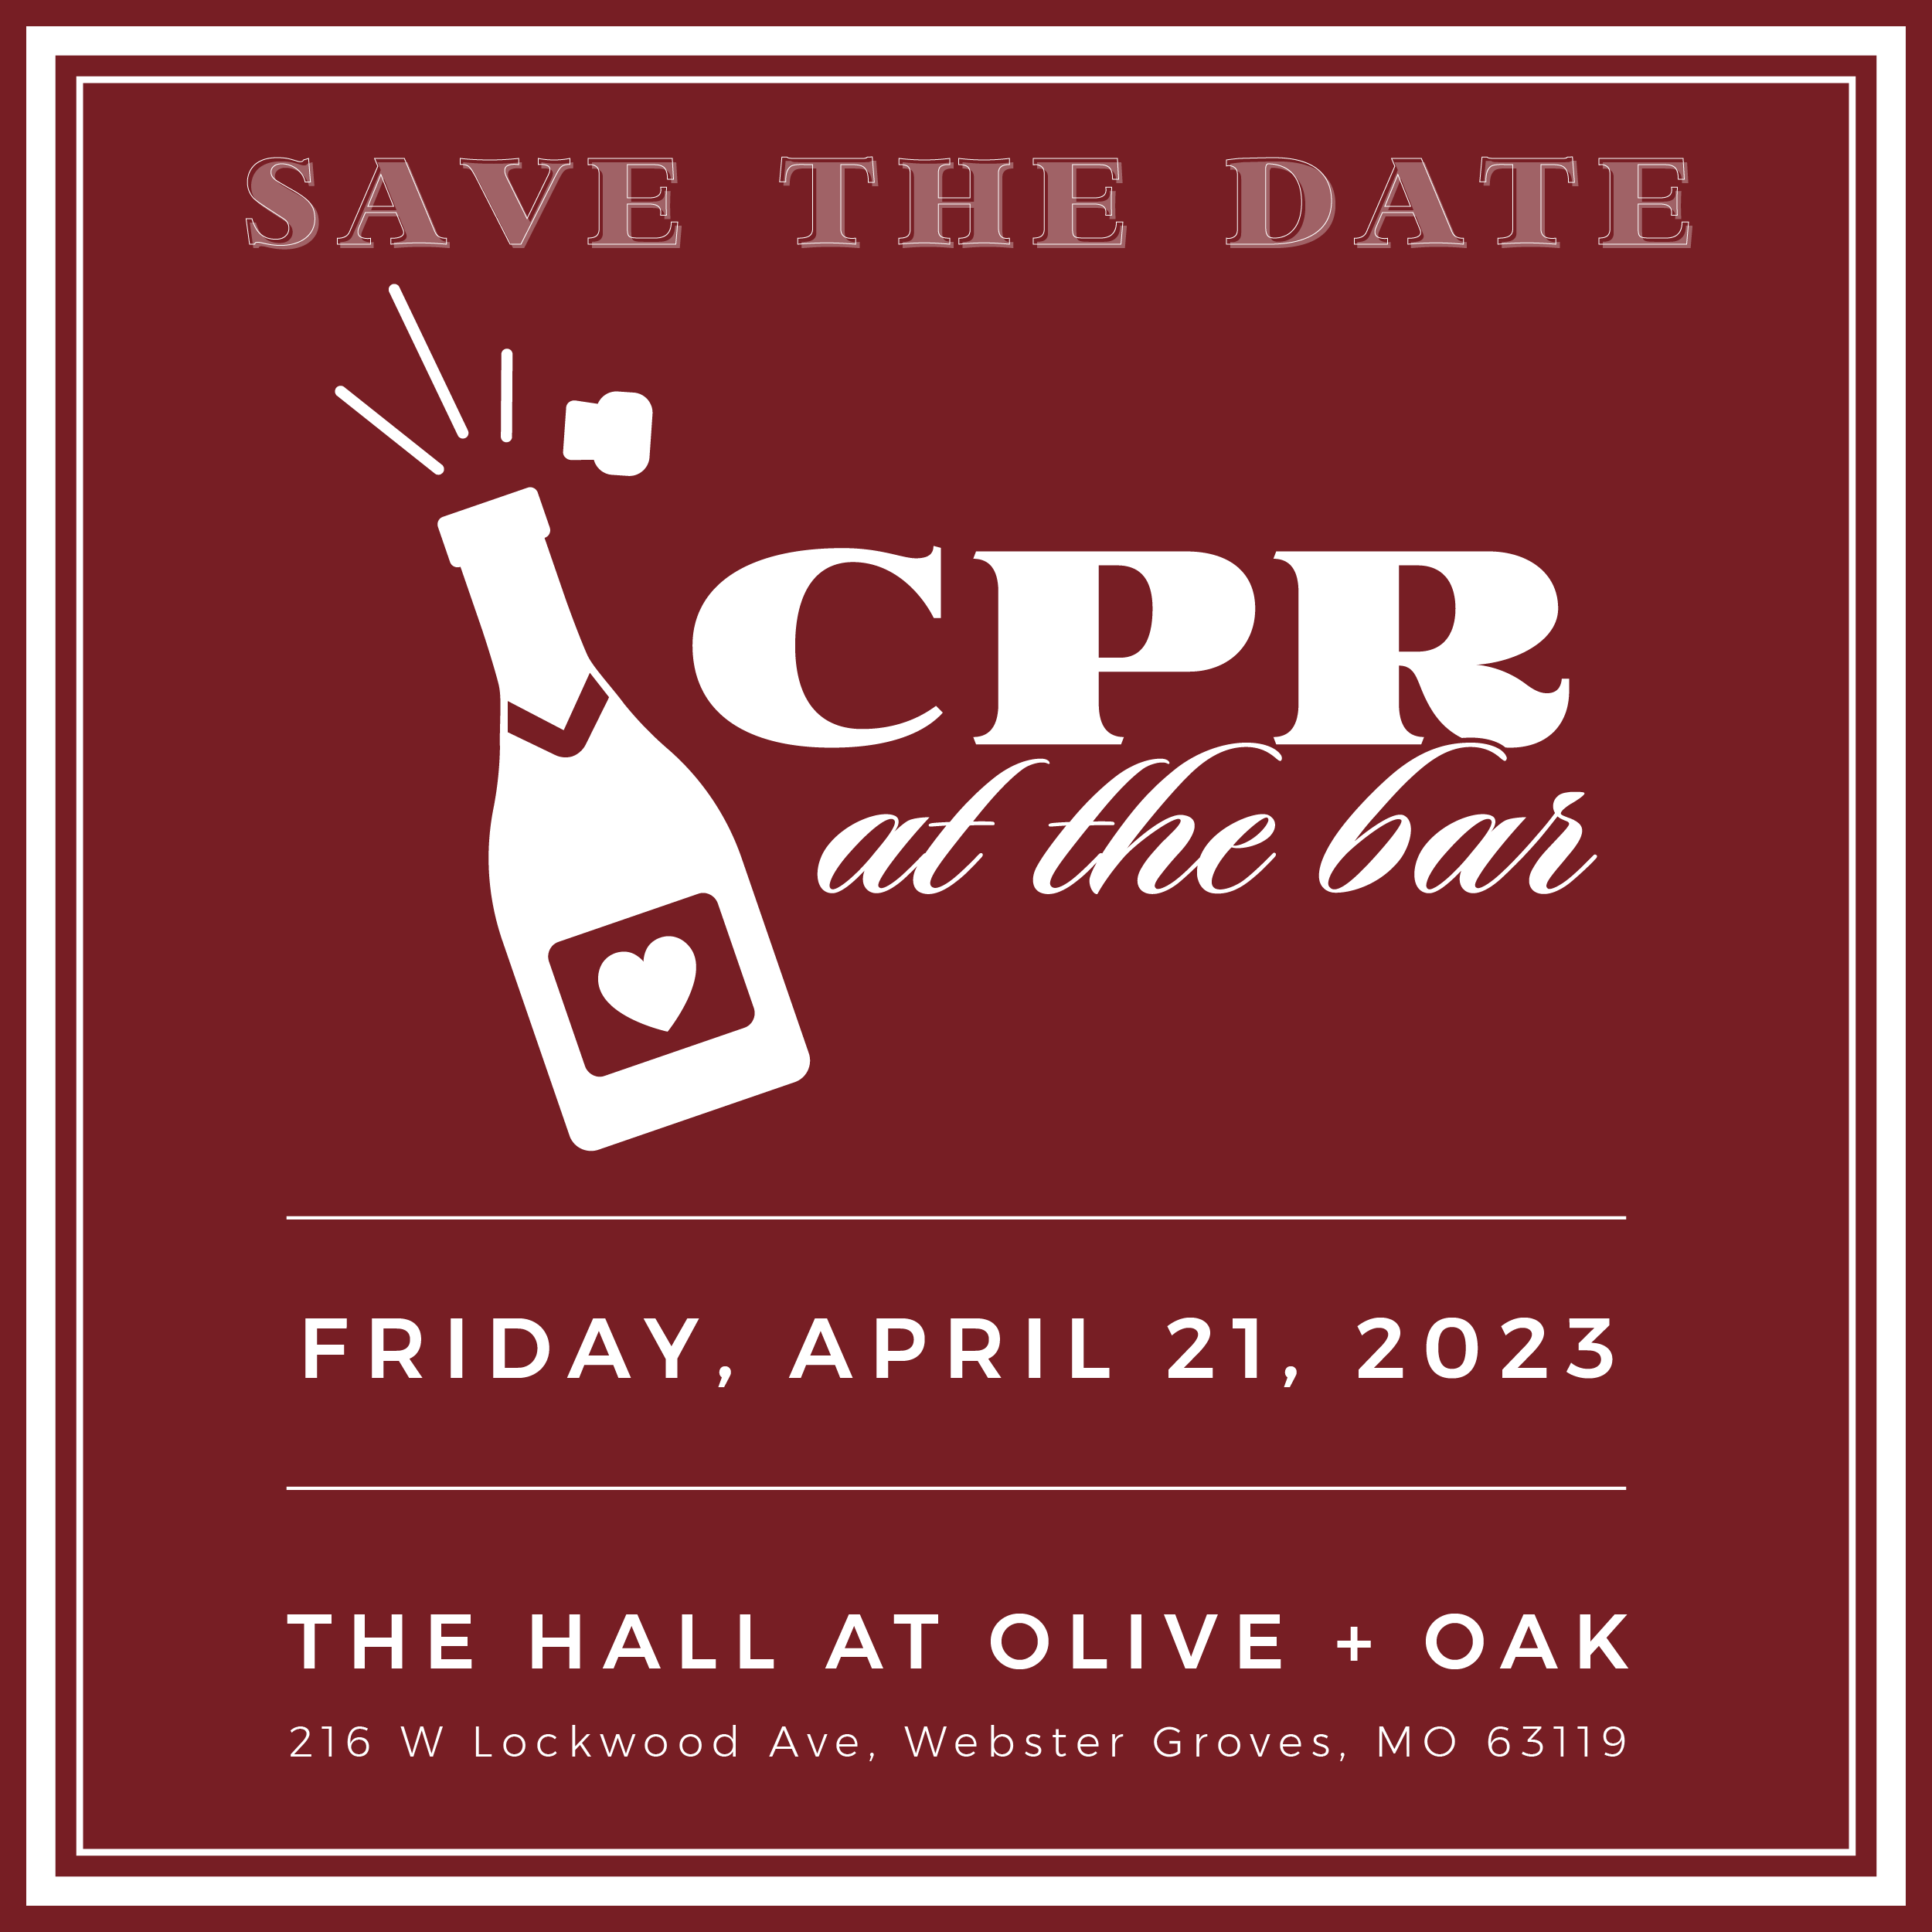 CPR at the bar save the date 2023